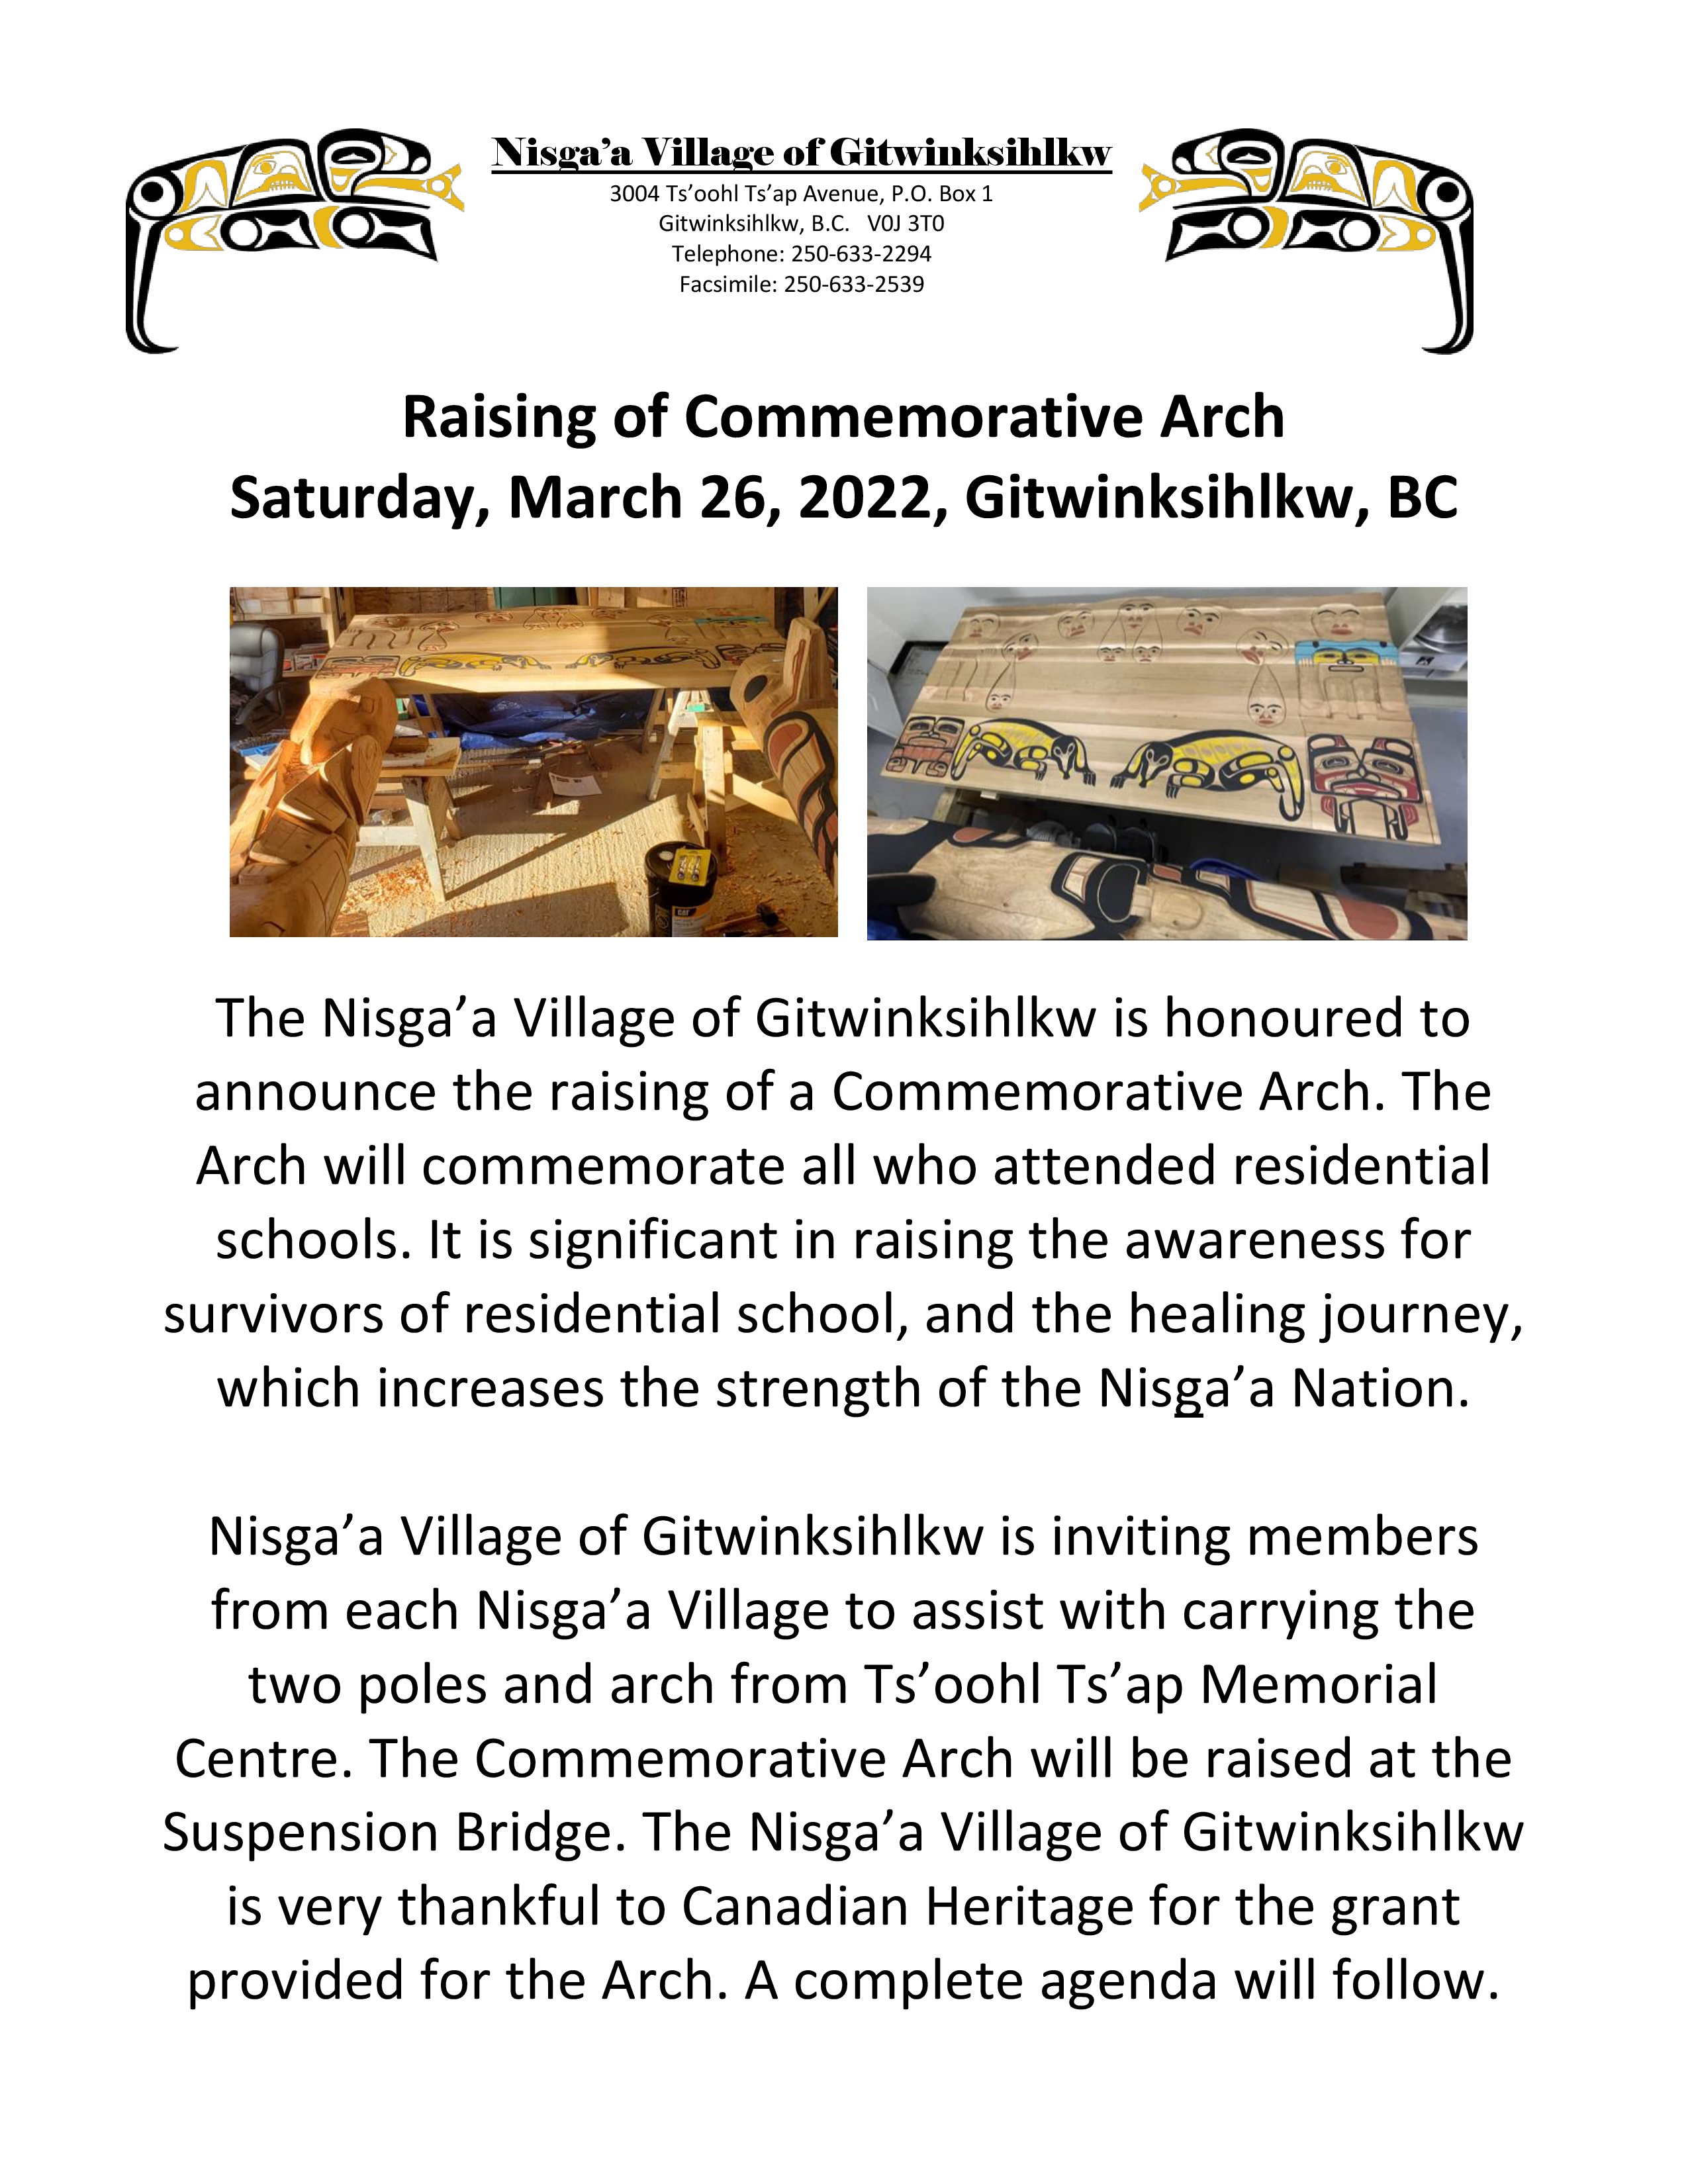 Raising of Commemorative Arch. Event: March 26, 2022, in Gitwinksihlkw